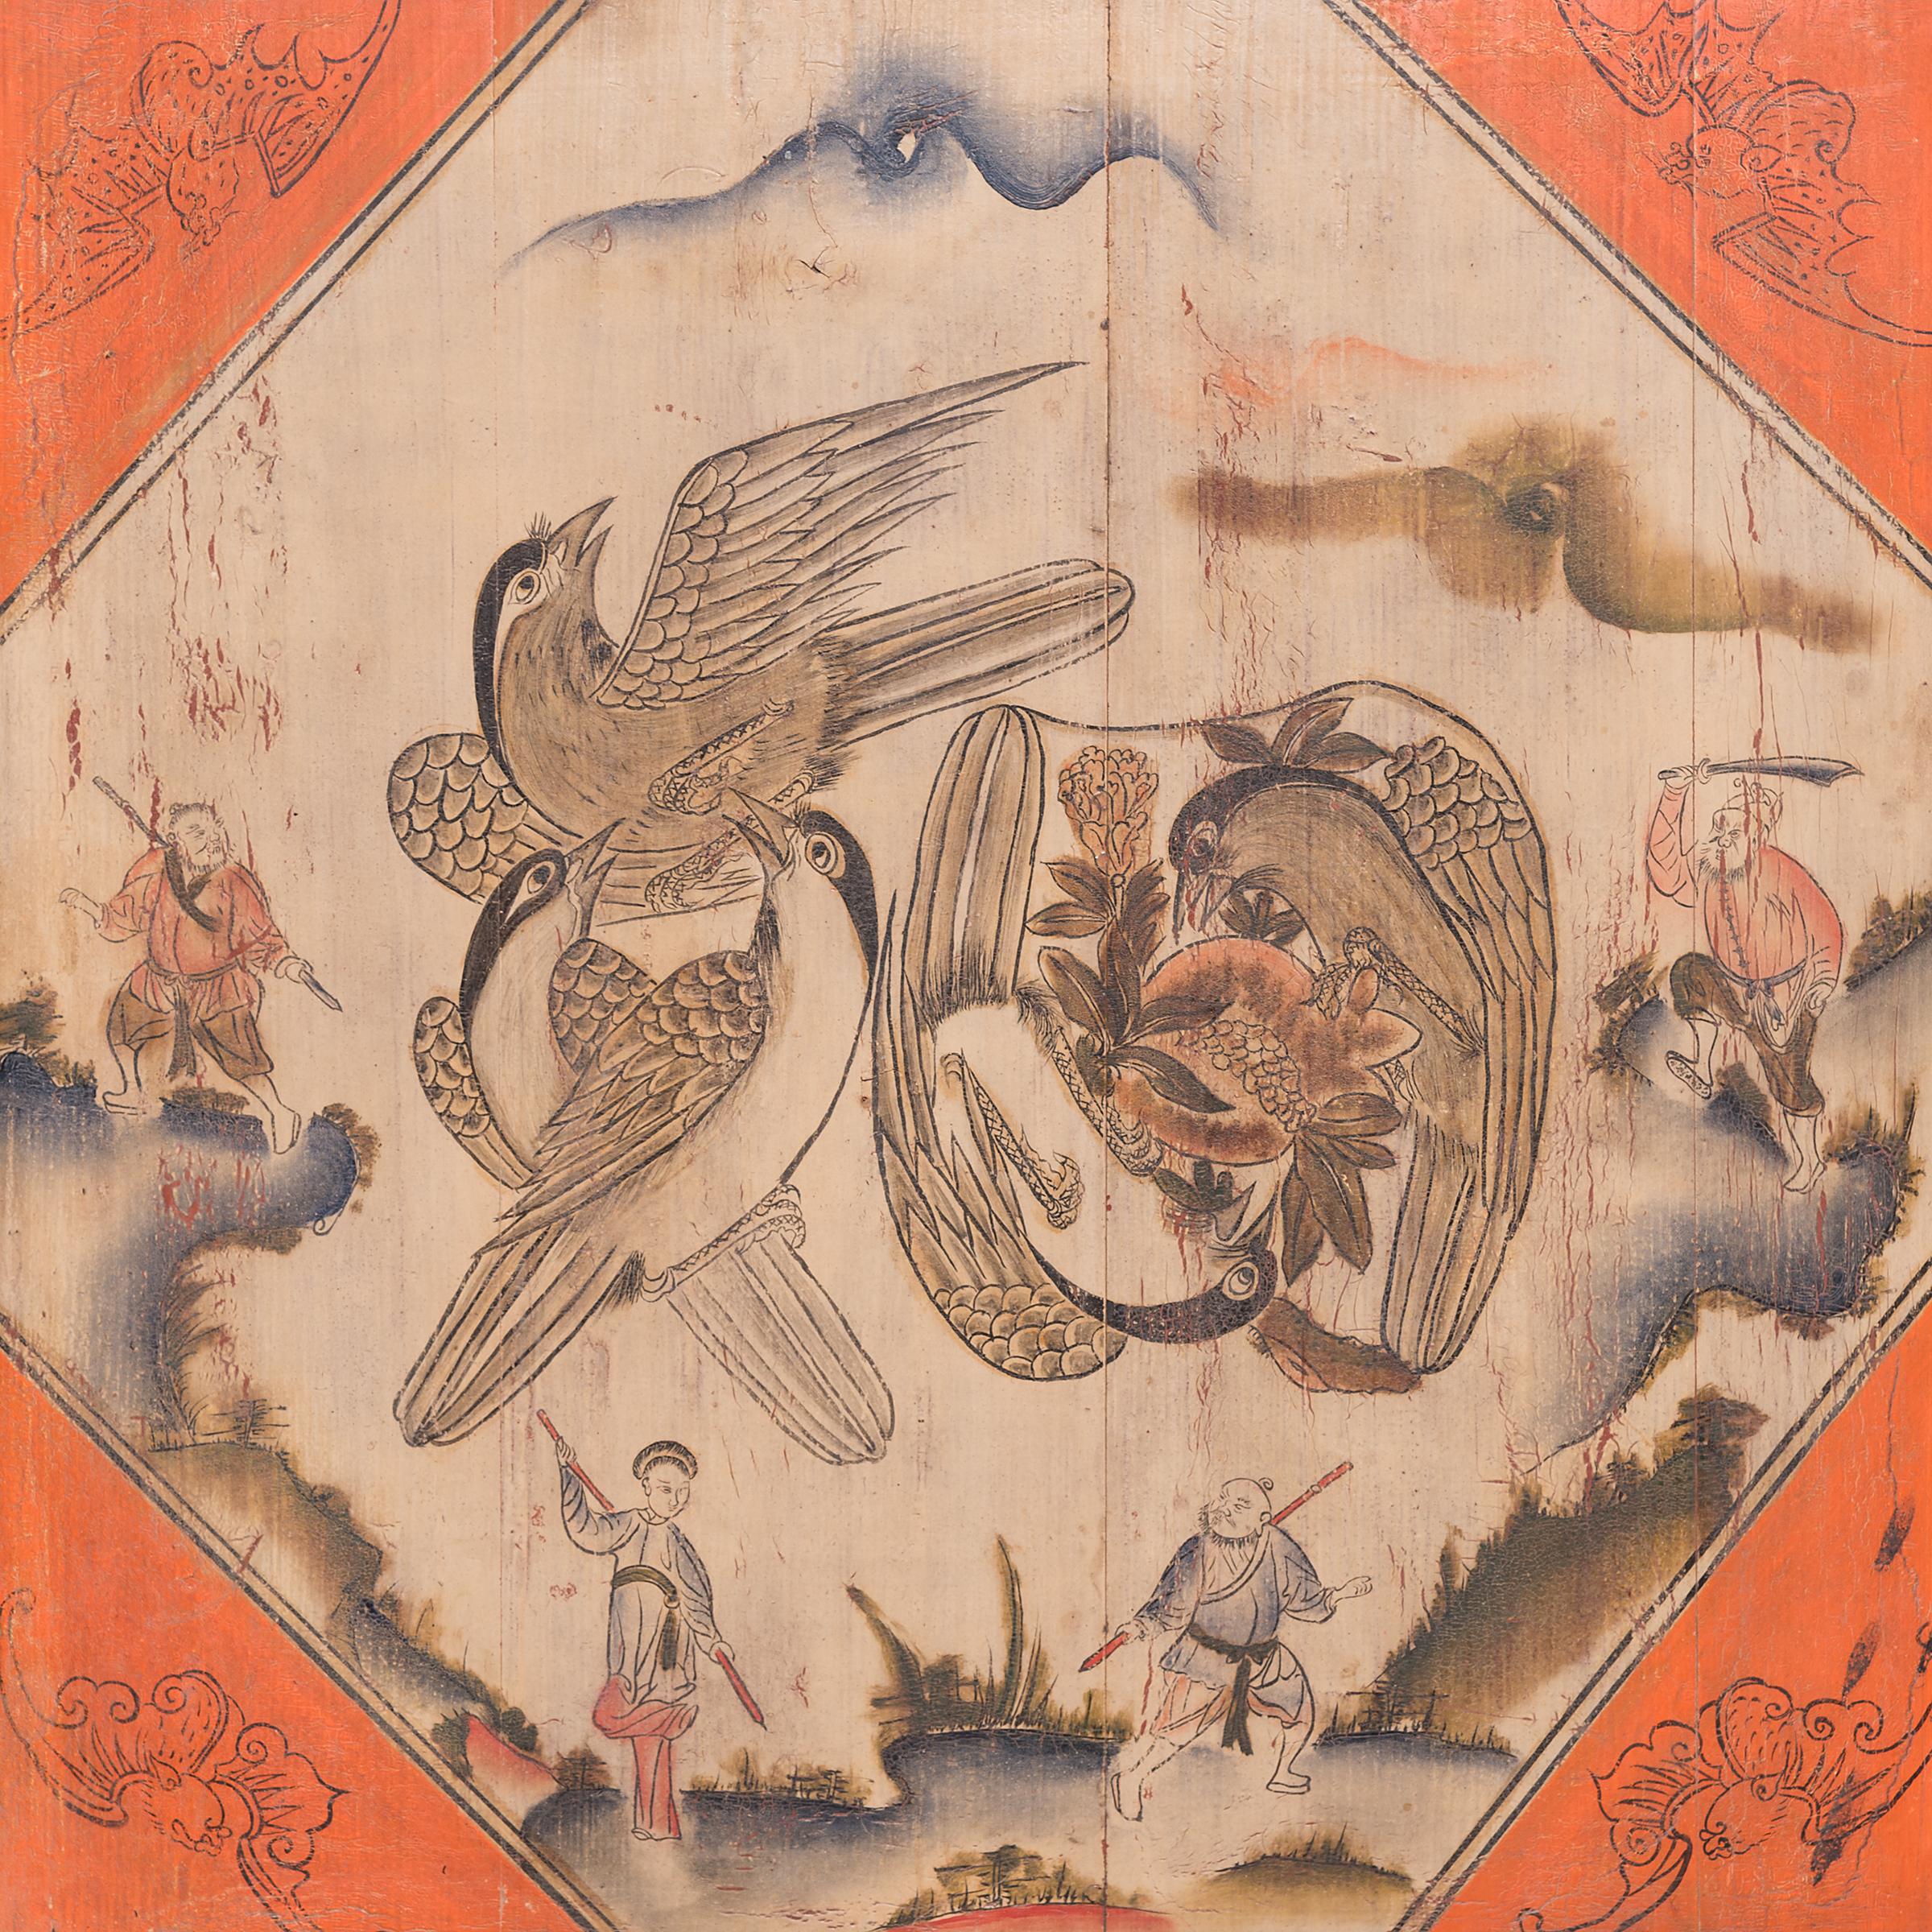 Its orange border still impressively vibrant, this 19th century painted wood panel from northern China depicts a scene full of traditional Chinese symbolism. Surrounded by warriors poised for battle, five magpies hover mid-flight, arranged in the